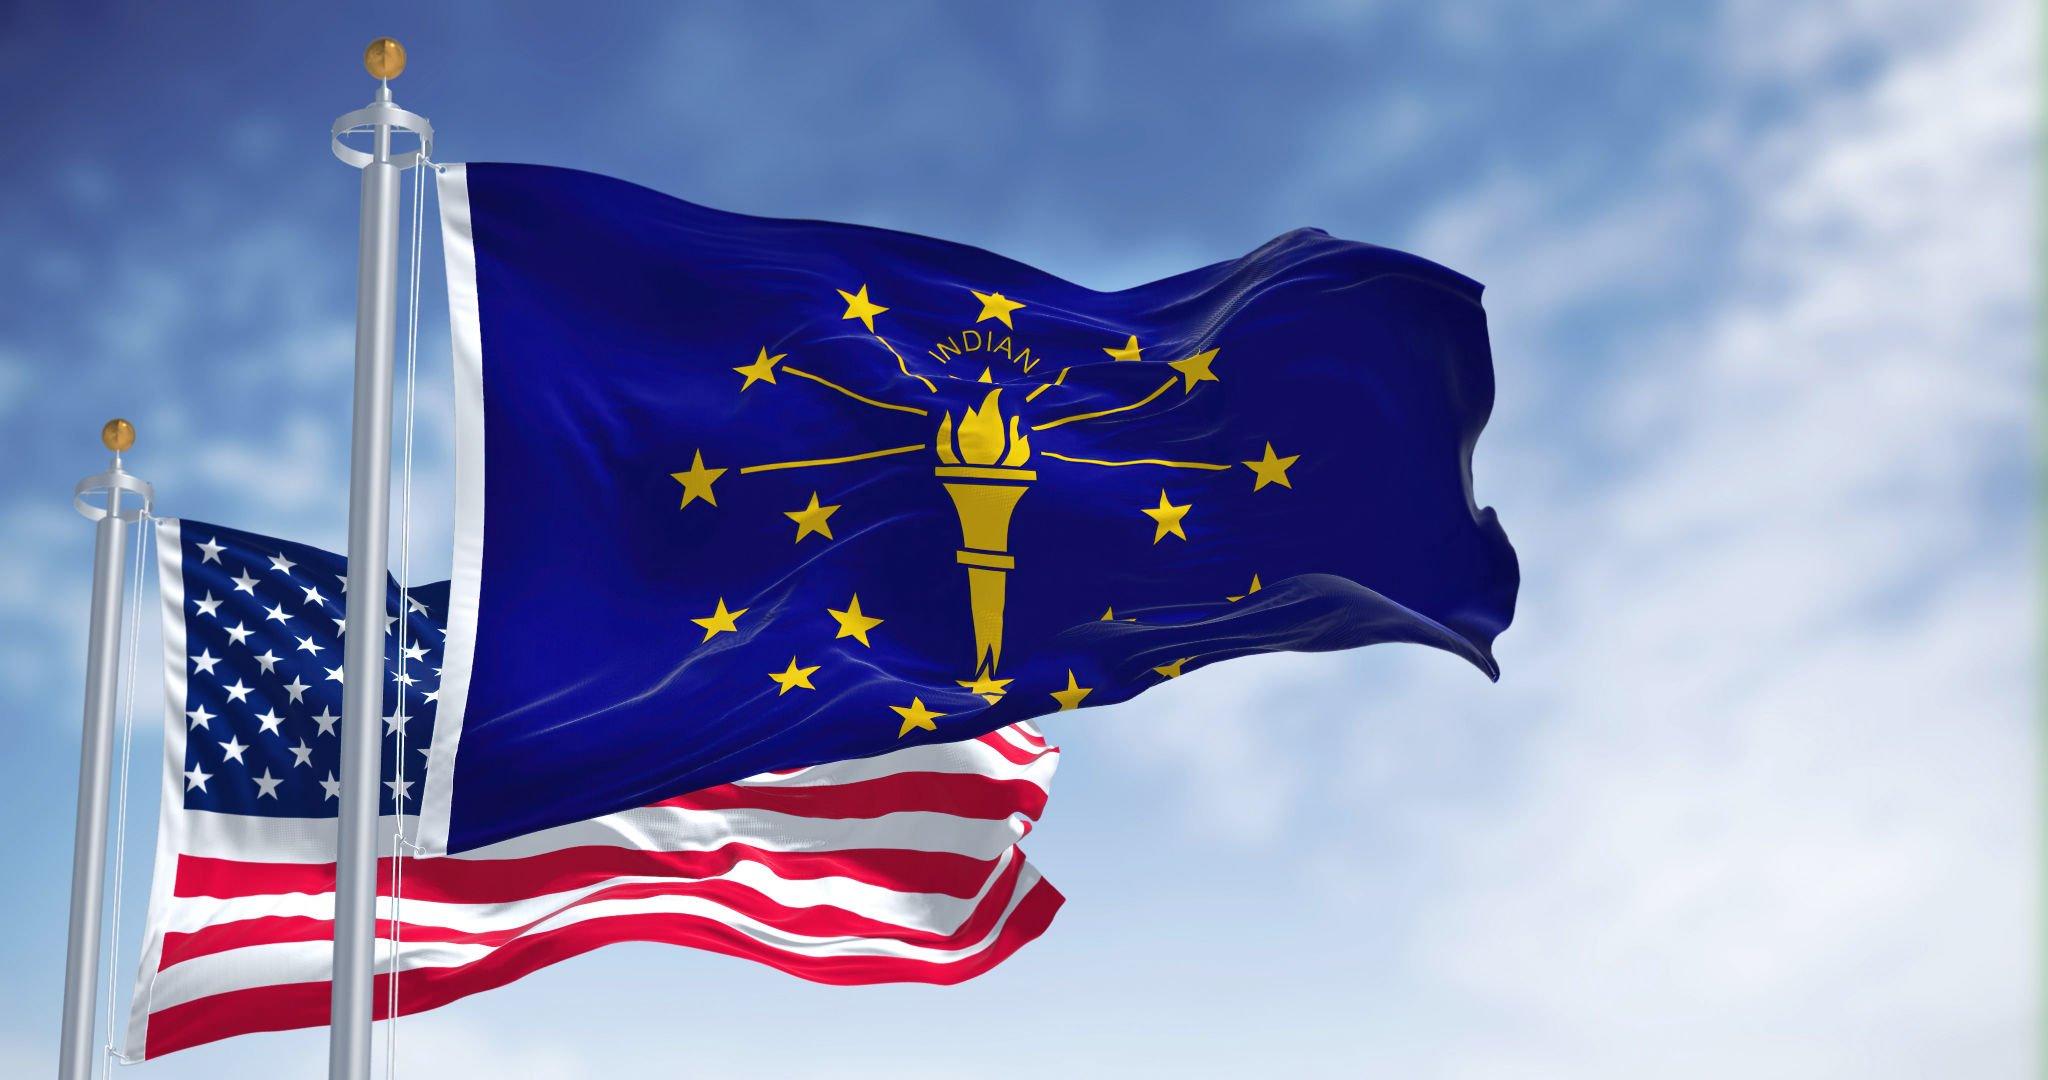 What Is Indiana Known For? (16 Things It’s Famous For)